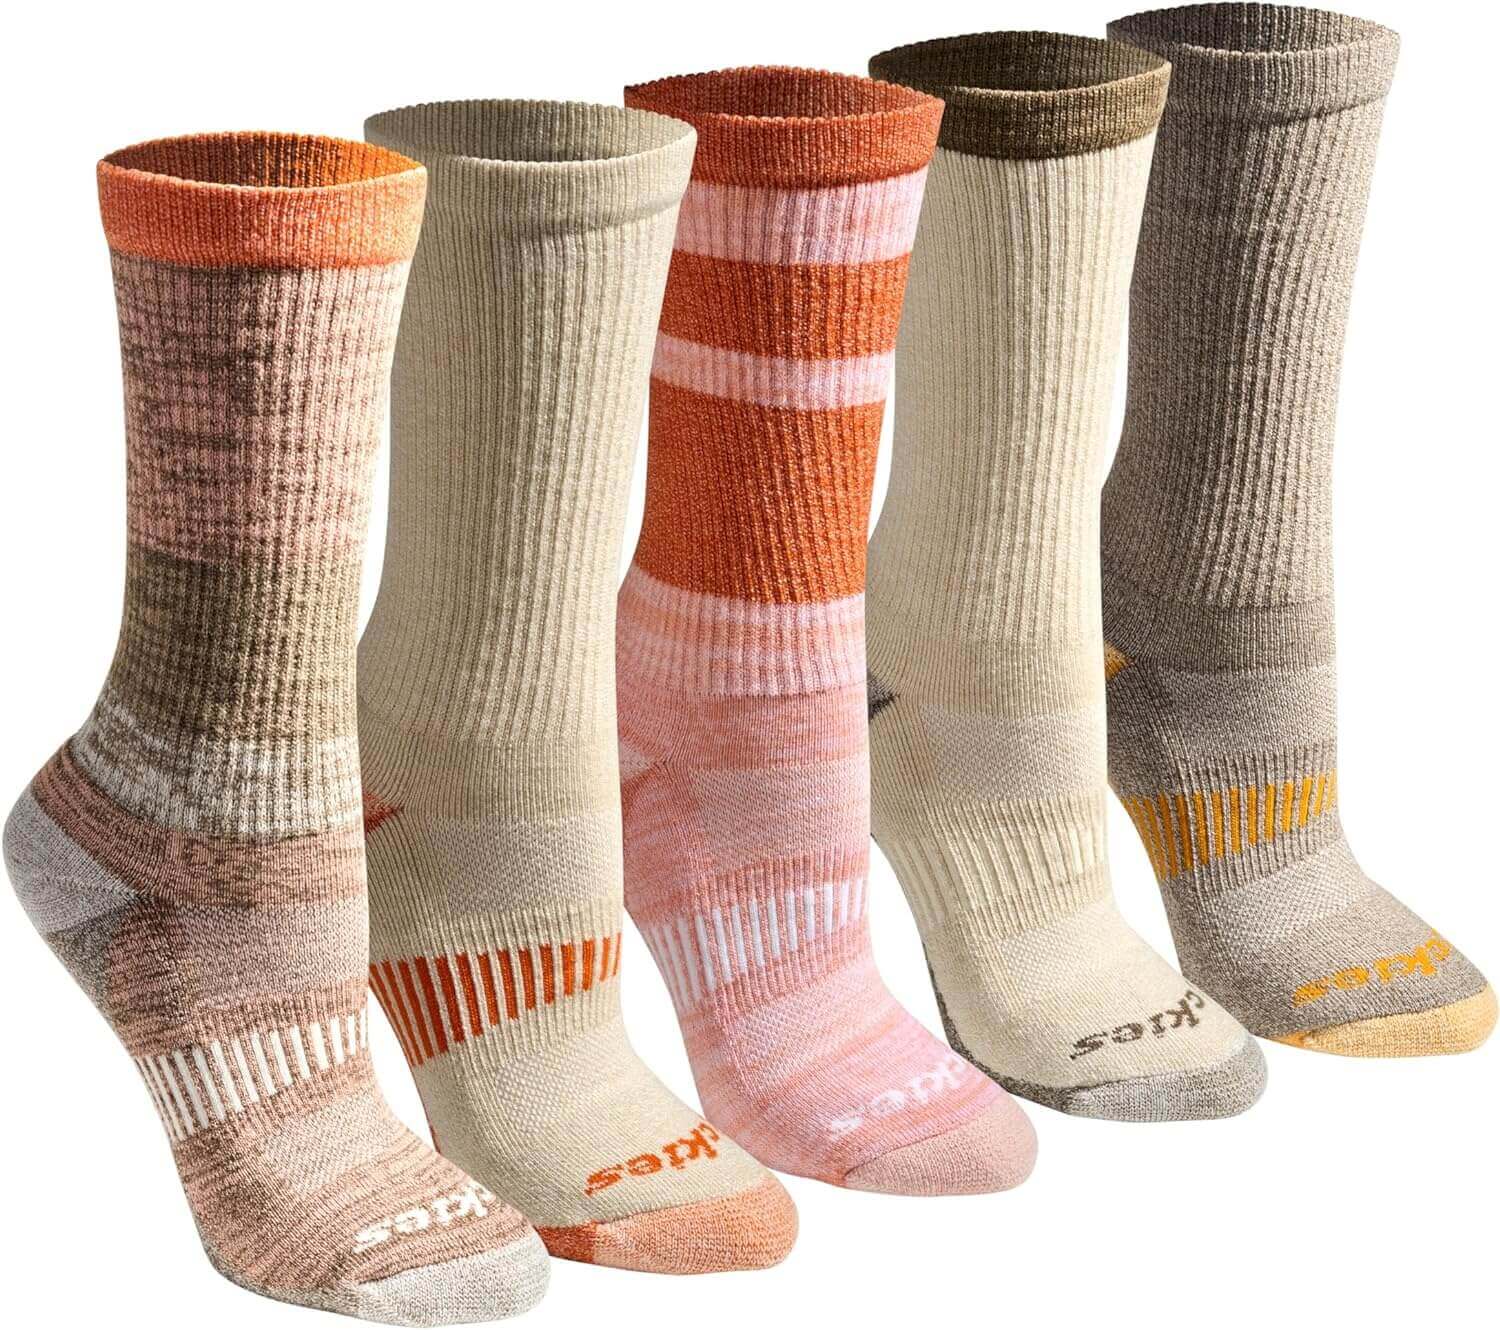 Shop The Latest >Women's Dri-tech Moisture Control Crew Socks Multipack > *Only $24.29*> From The Top Brand > *Dickiesl* > Shop Now and Get Free Shipping On Orders Over $45.00 >*Shop Earth Foot*